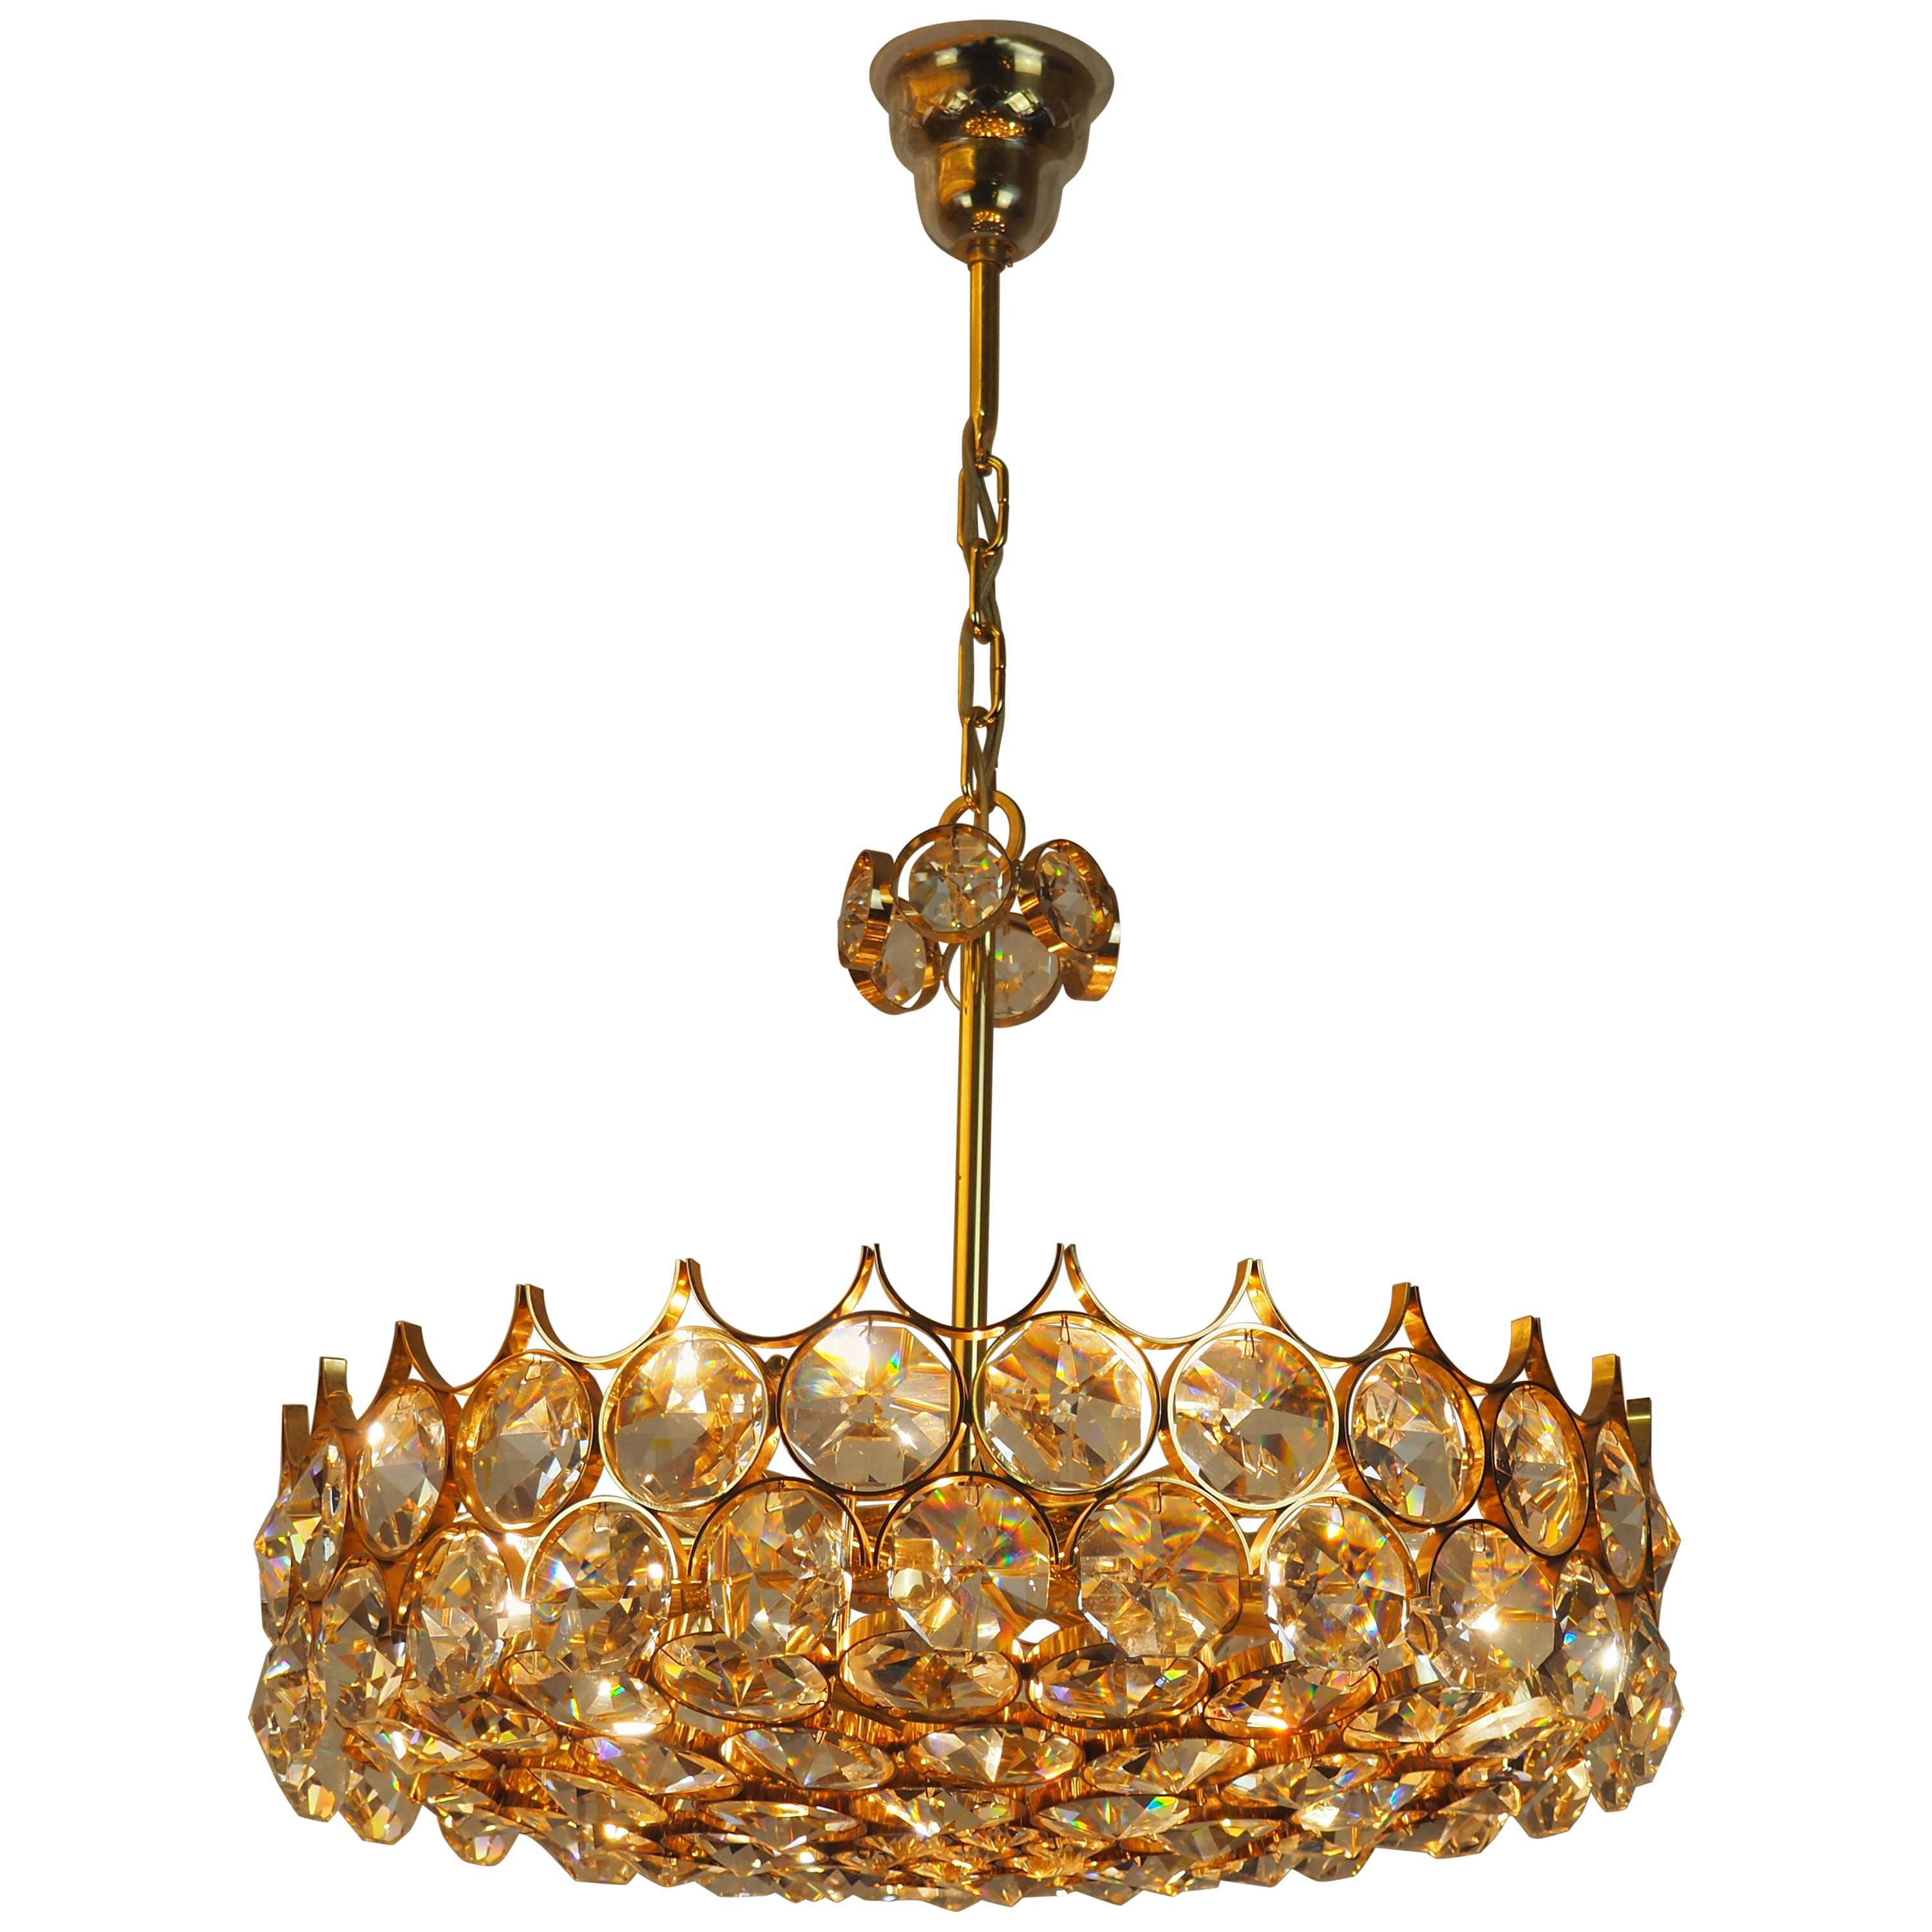 Lovely Large Gilt Brass and Crystal Chandelier by Palwa, circa 1970s